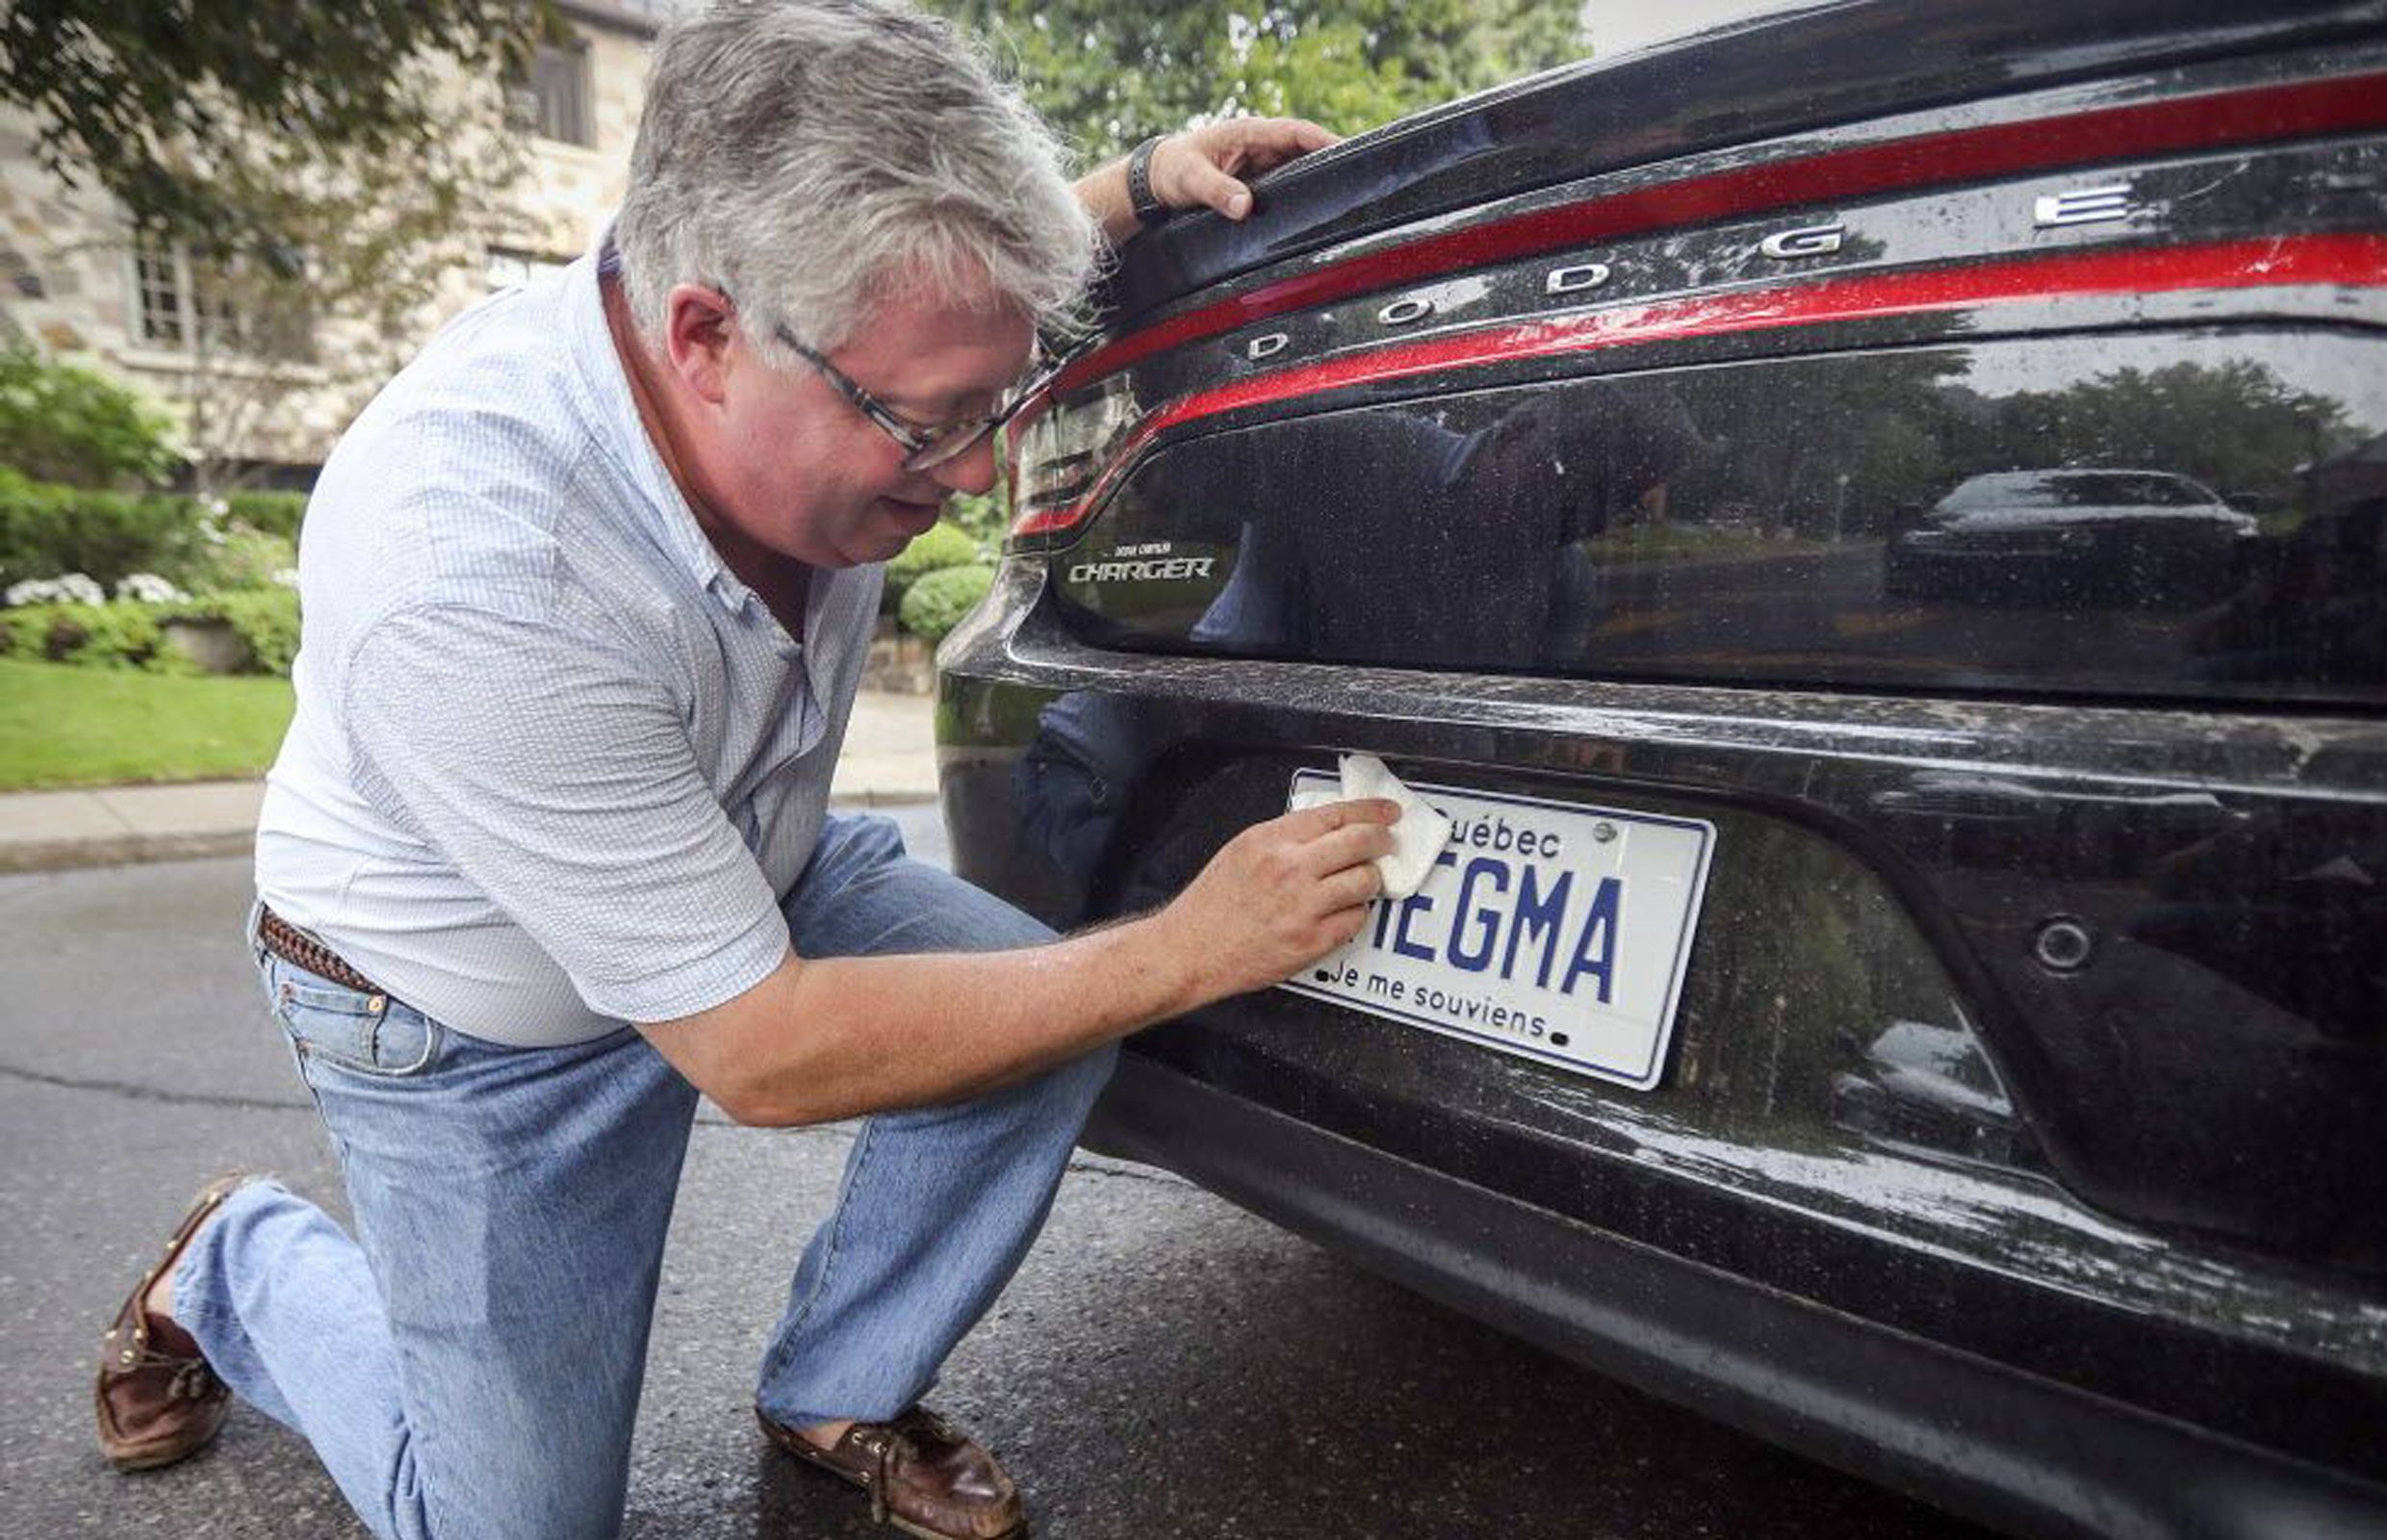 These 10 custom licence plates were taken back after the DMV got